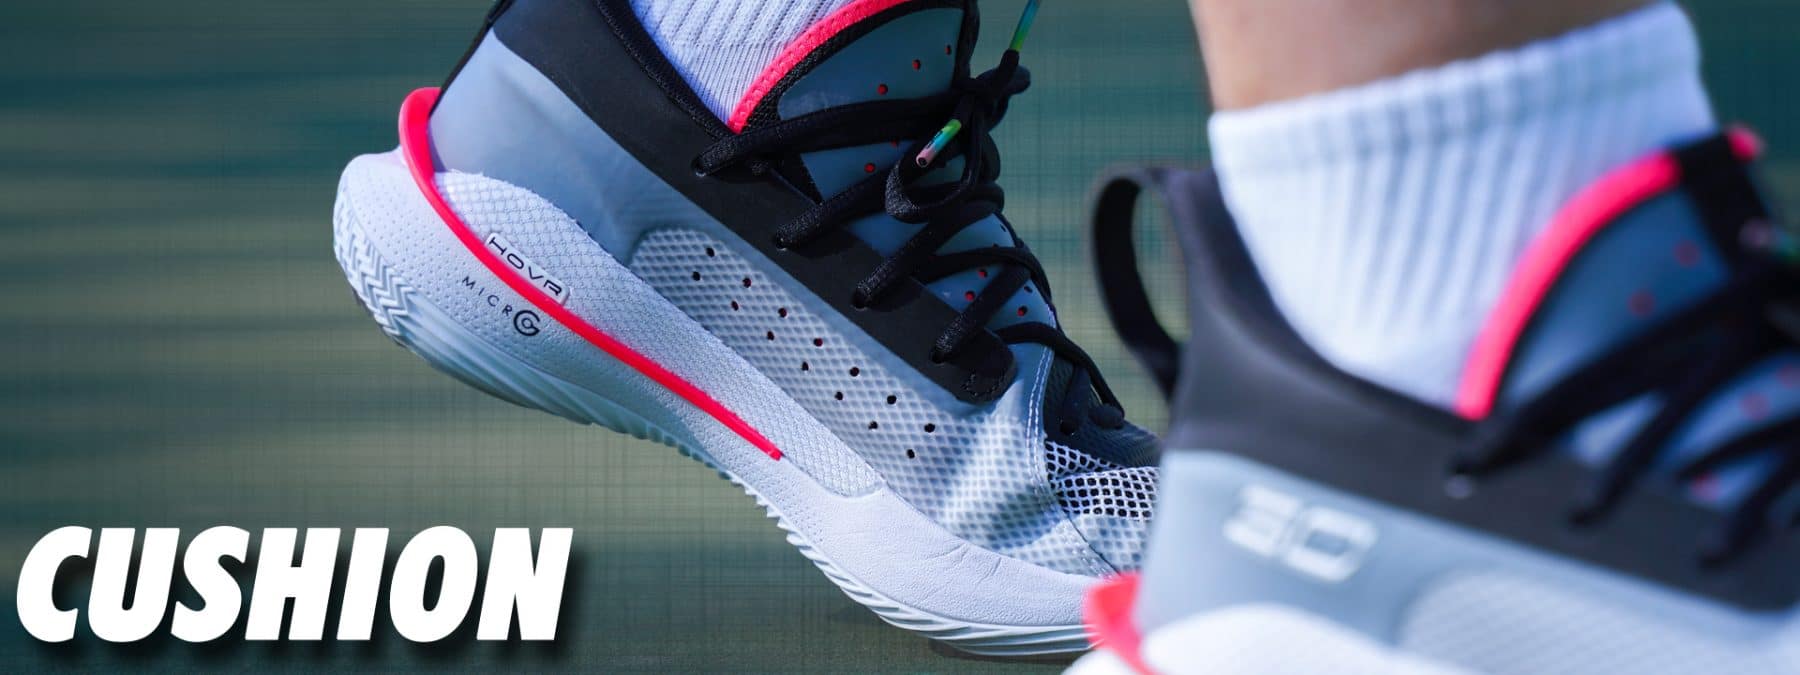 Under Armour Curry 7 Performance Review - WearTesters